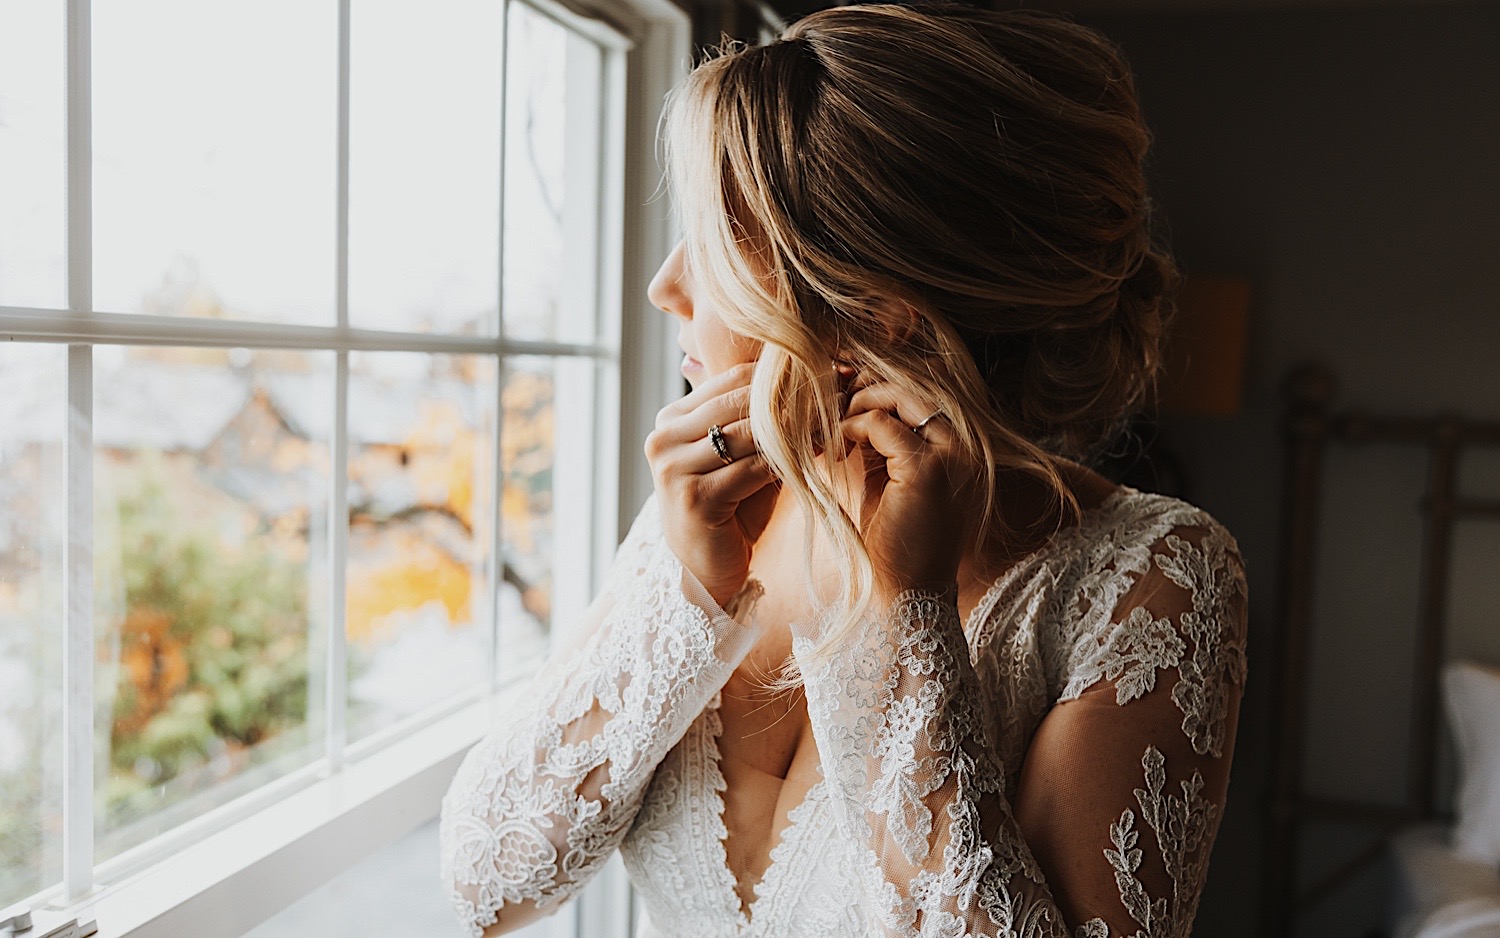 A bride in her wedding dress looks out of a window while putting on her earrings